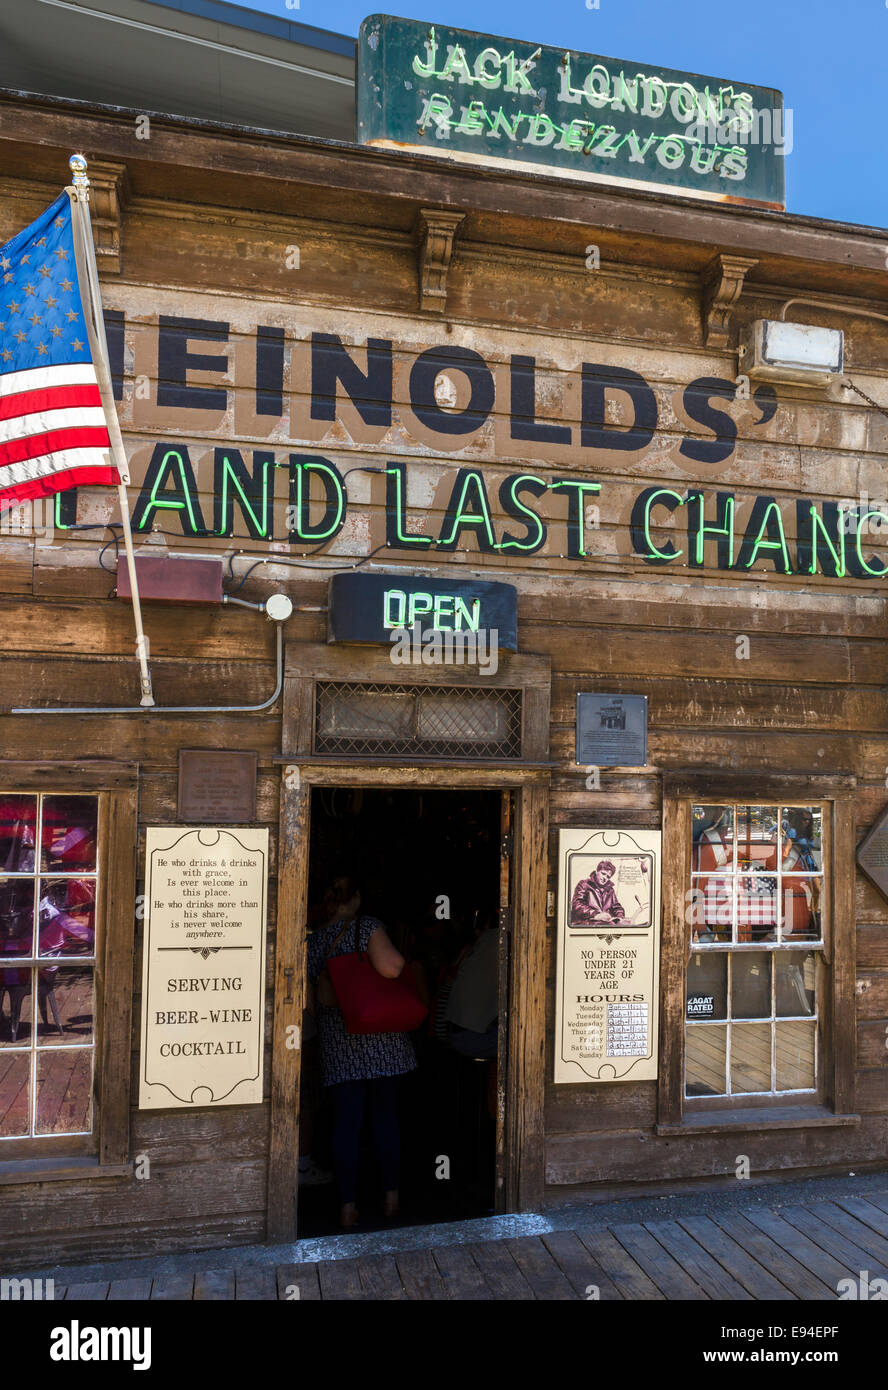 Heinhold's First and Last Chance Saloon (aka Jack London's Rendezvous), Jack London Square district, Oakland, California, USA Stock Photo